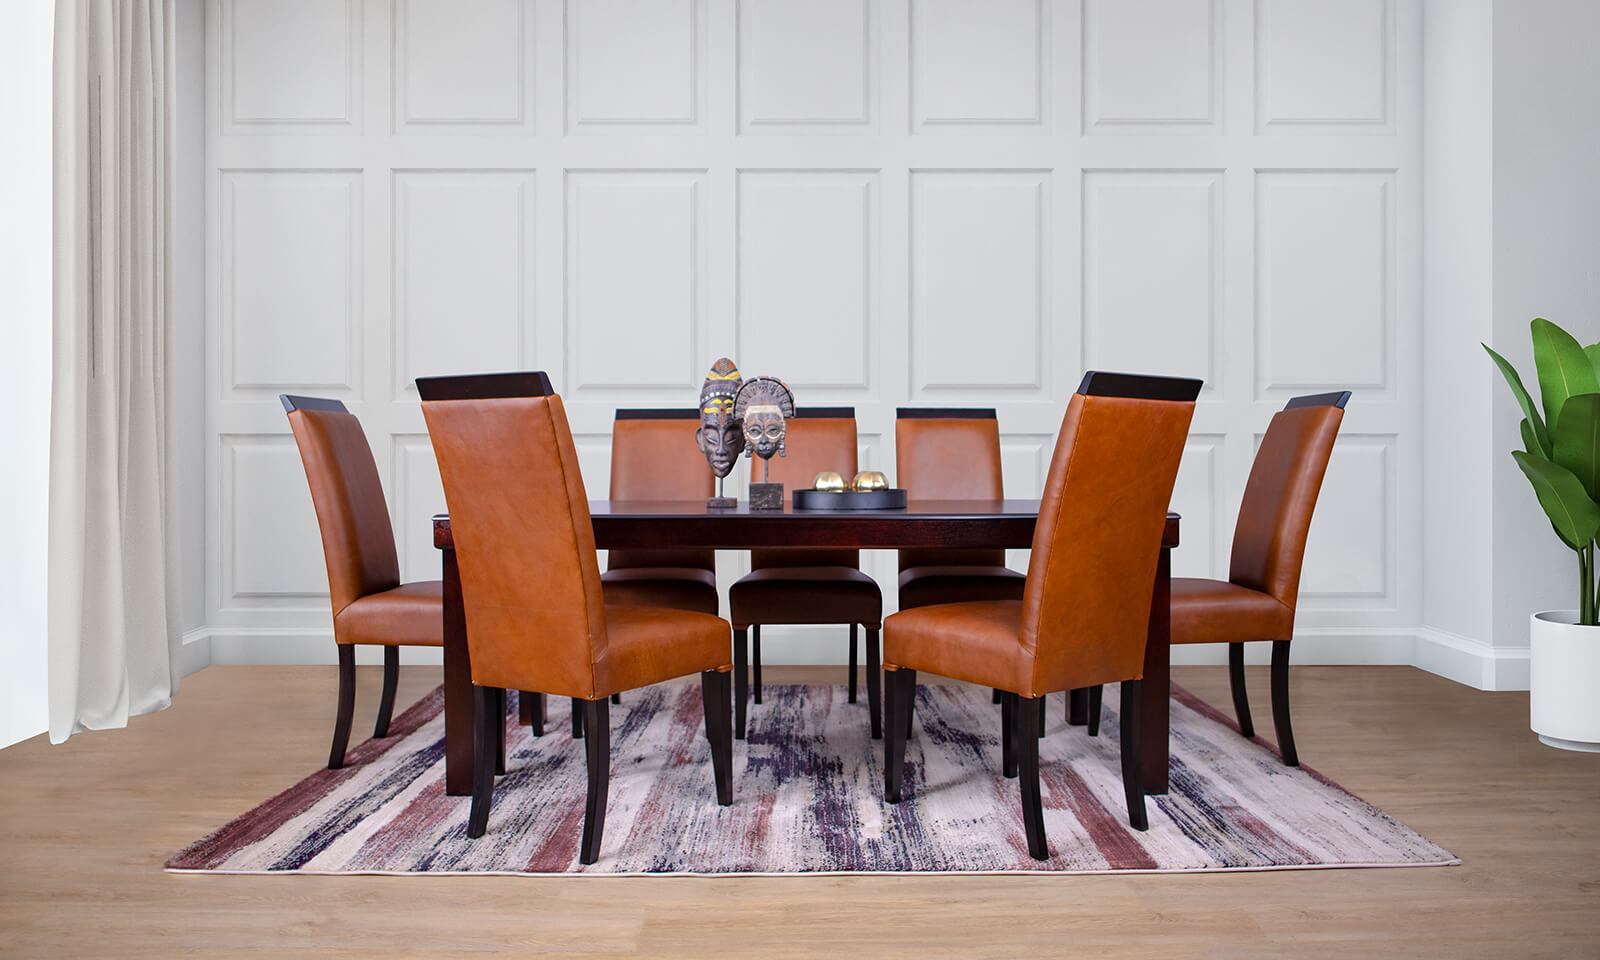 DISCOVER THE URBAN LEATHER DINING SET